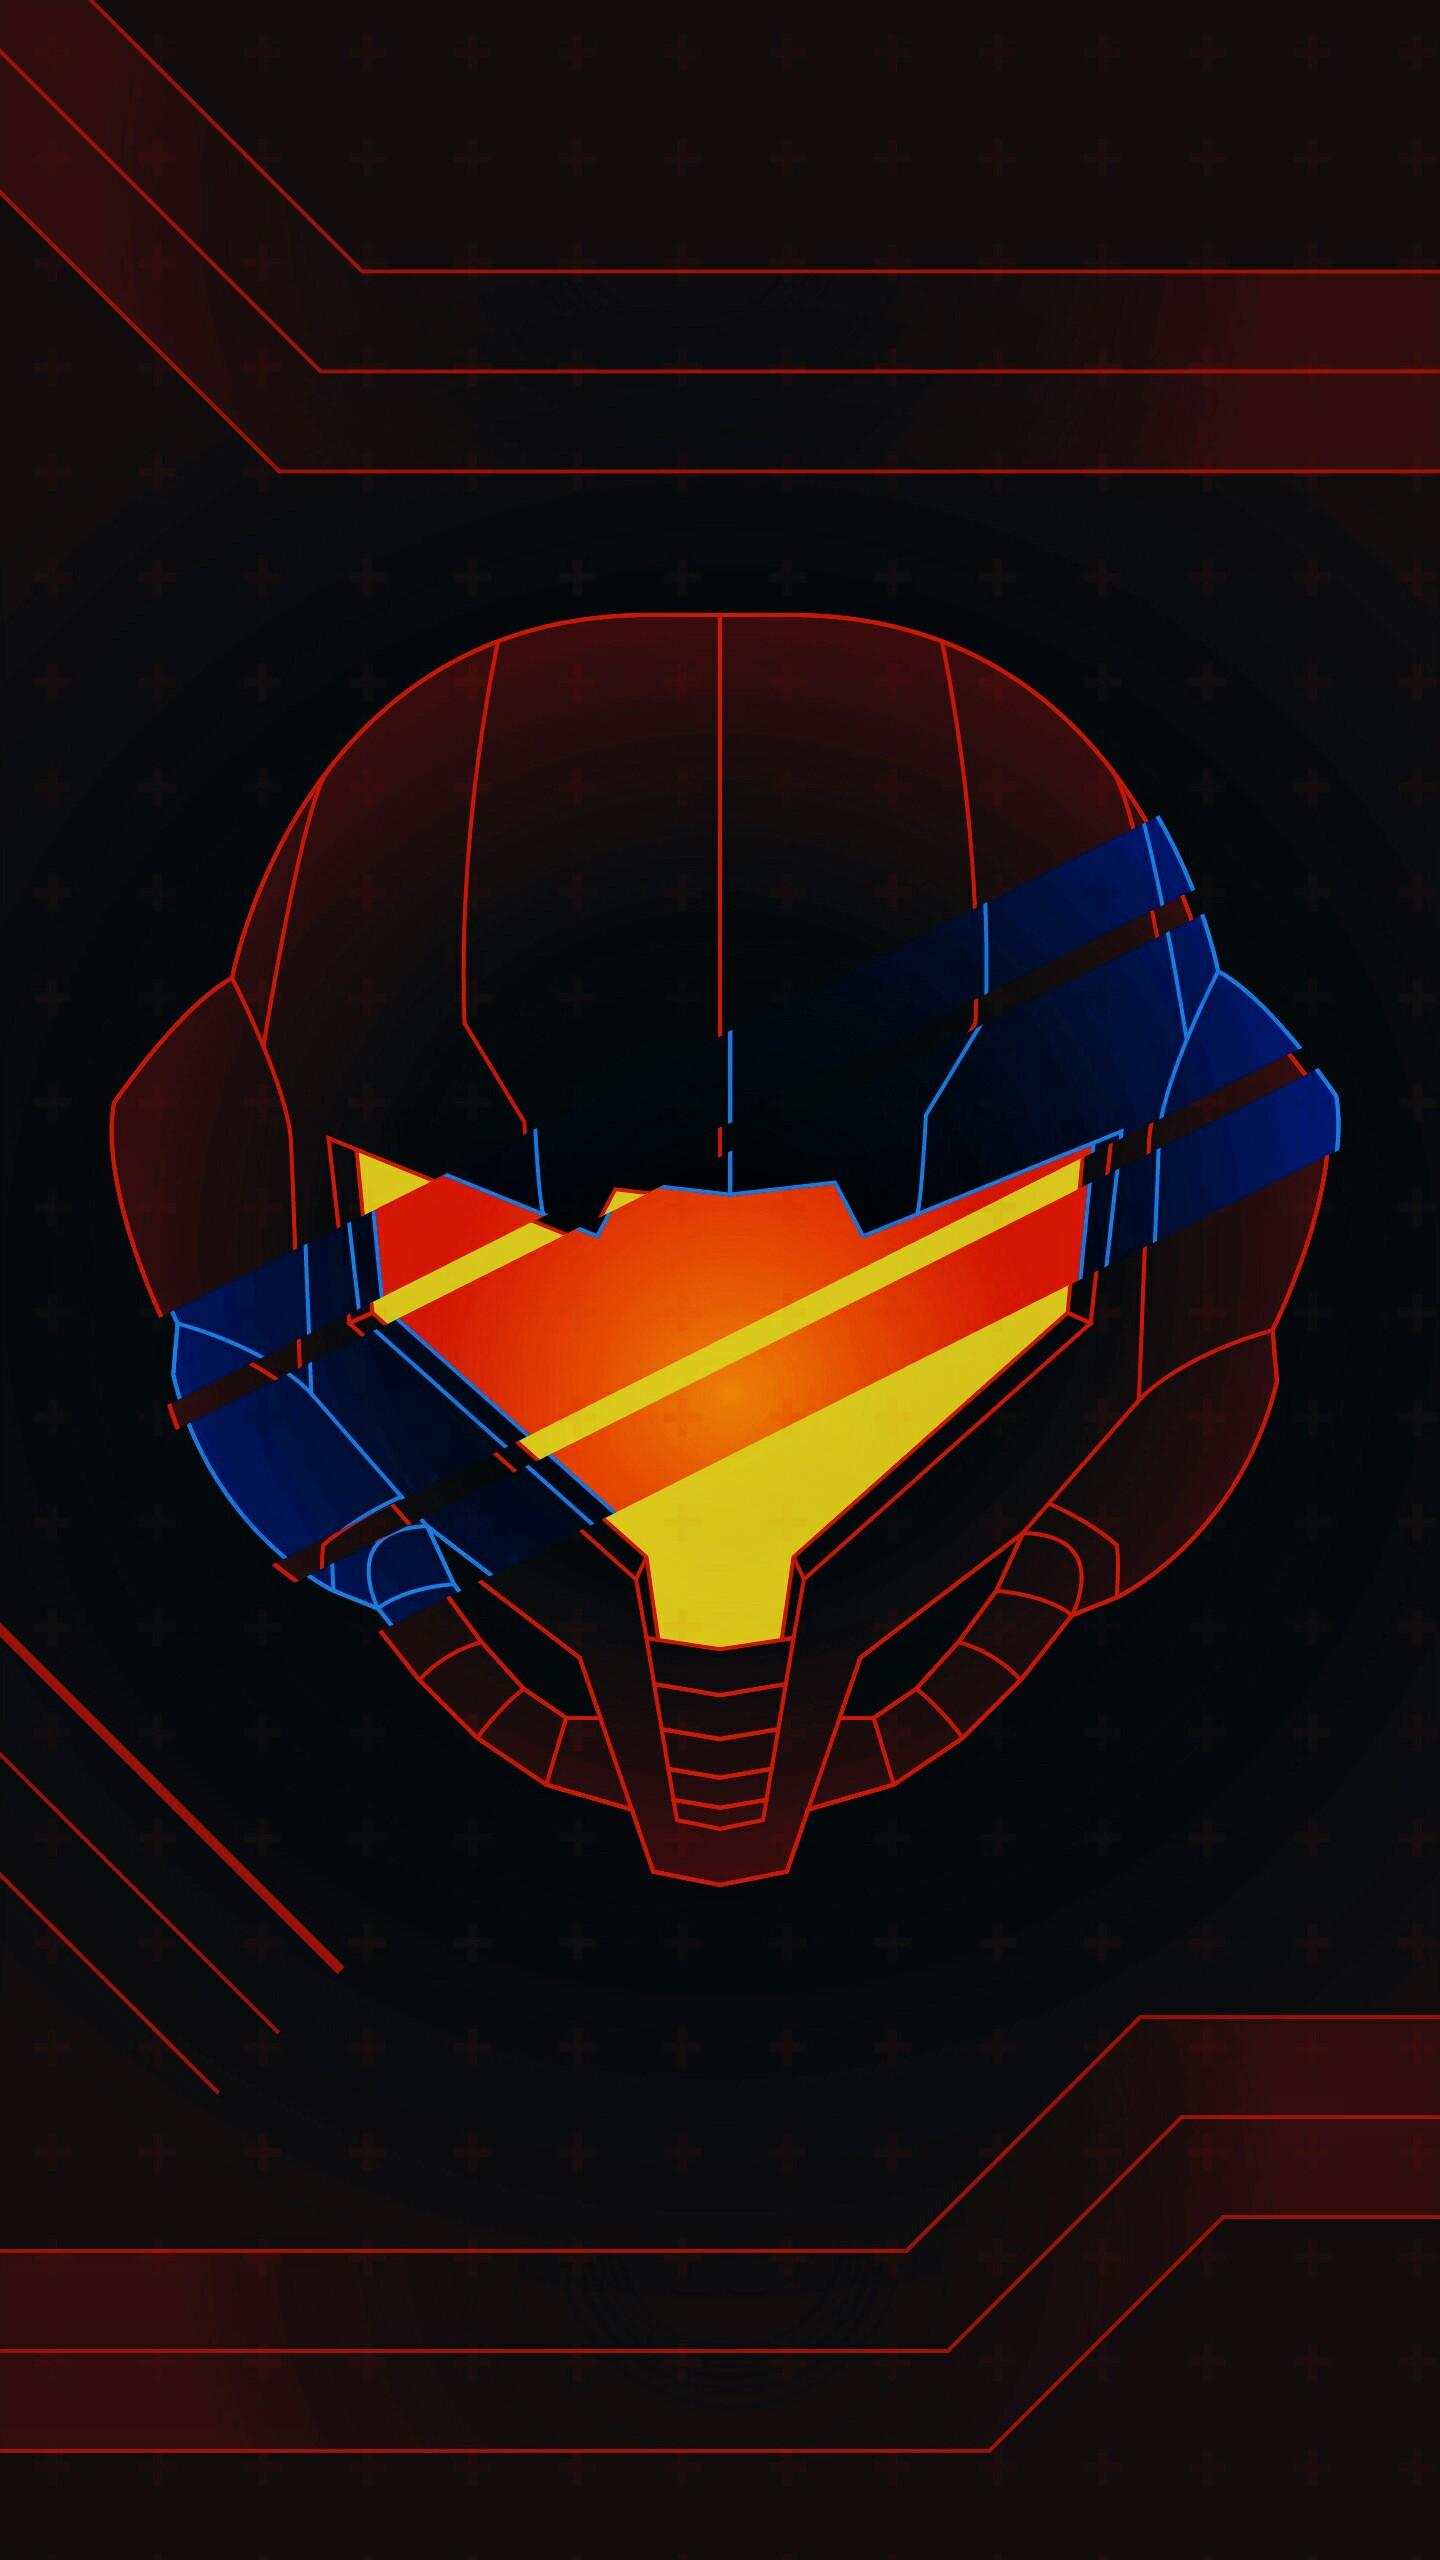 Made A Phone Wallpaper In Illustrator, Thought You - Metroid Phone Background - HD Wallpaper 